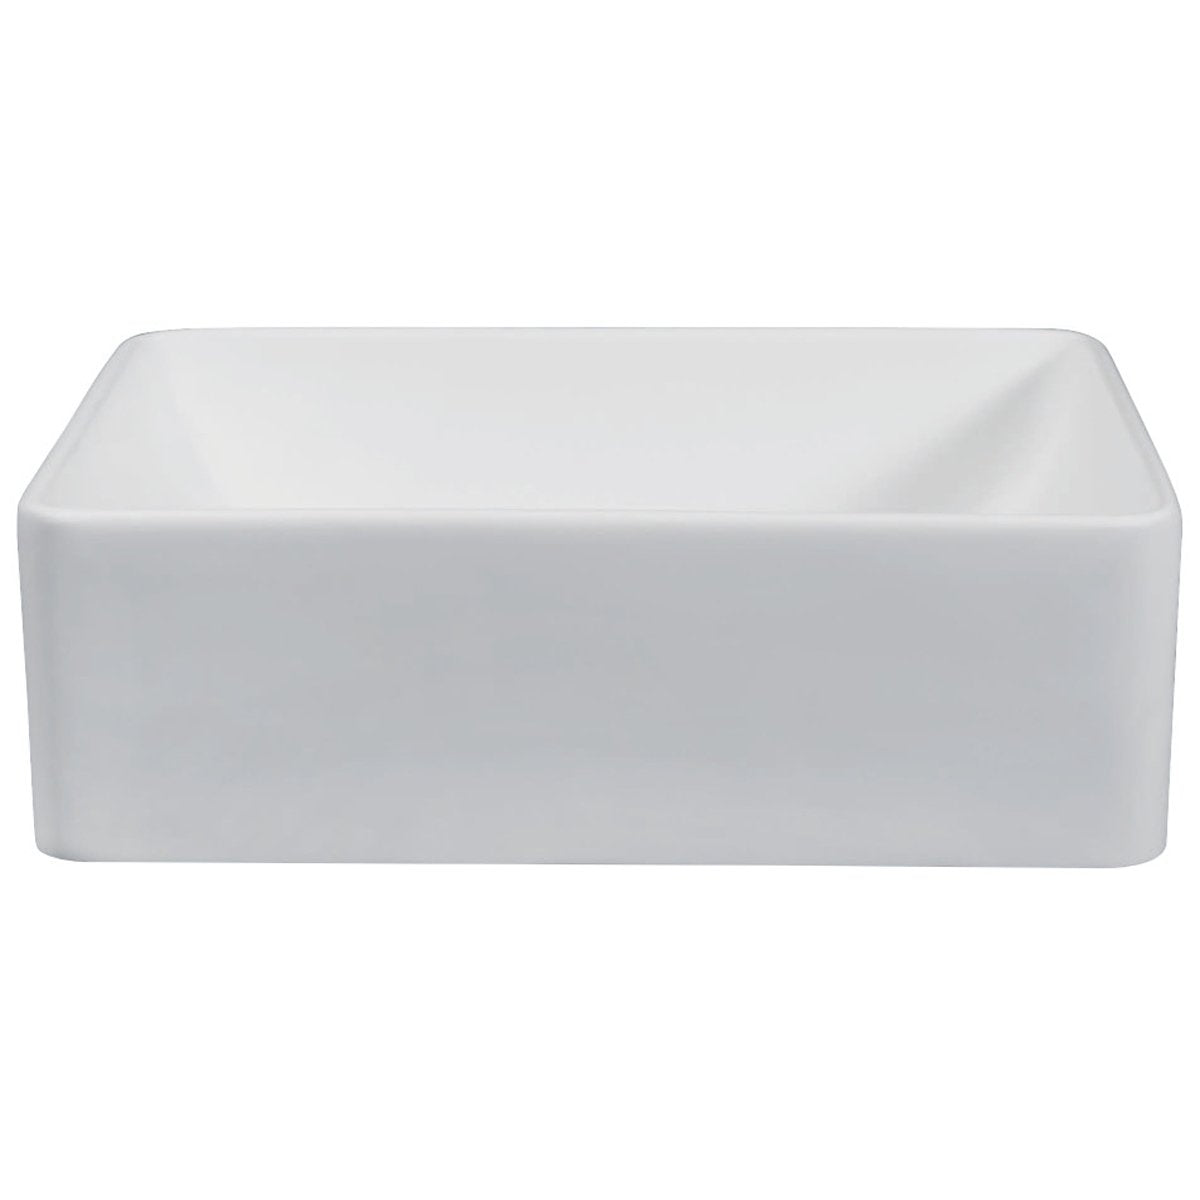 Kingston Brass Fauceture Solid Surface Matte Stone Single-Bowl Bathroom Sink